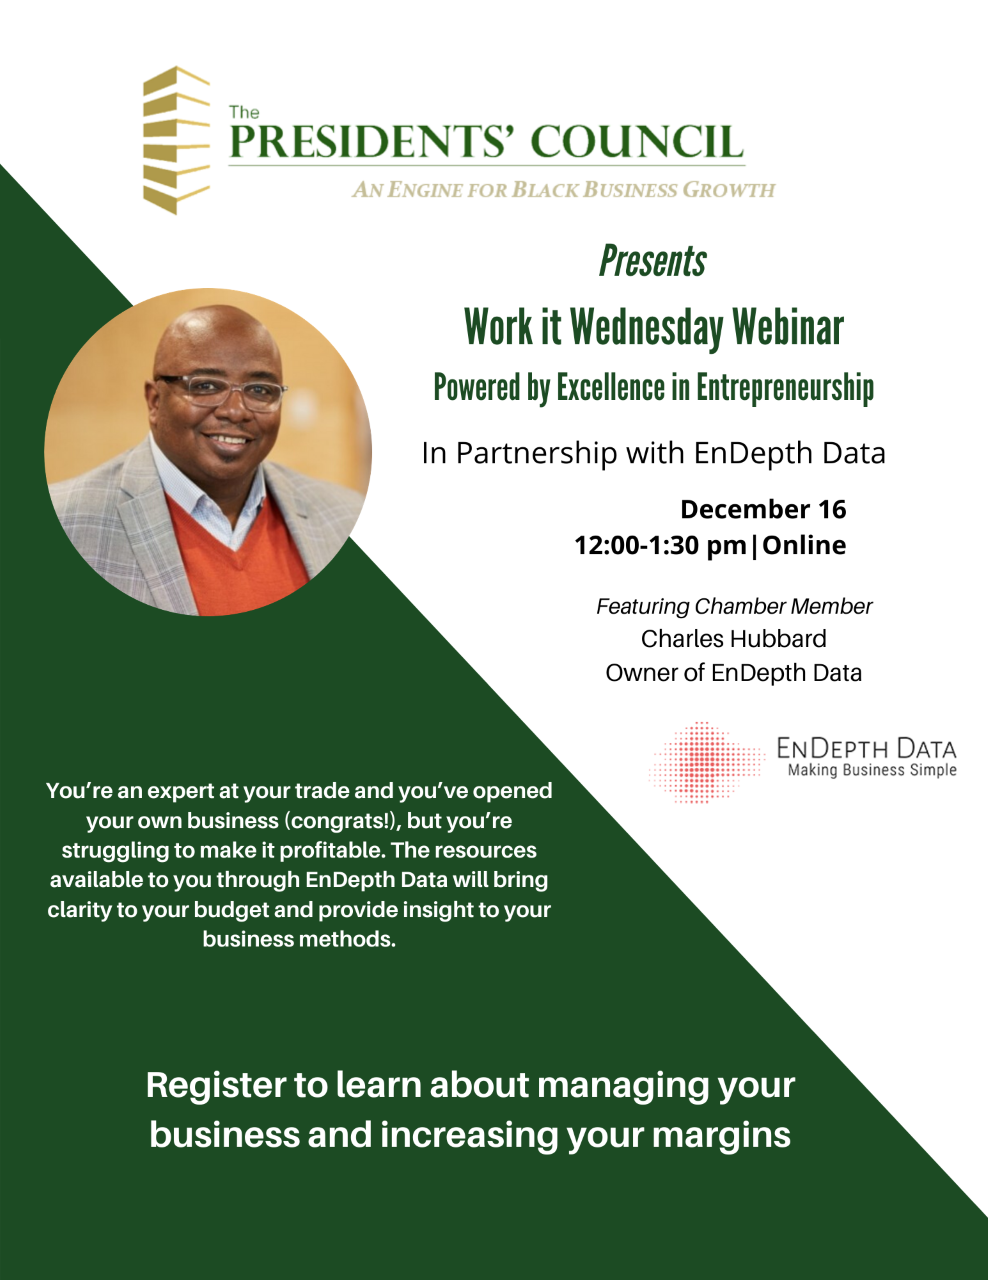 The Presidents' Council Presents: Work it Wednesday Webinar